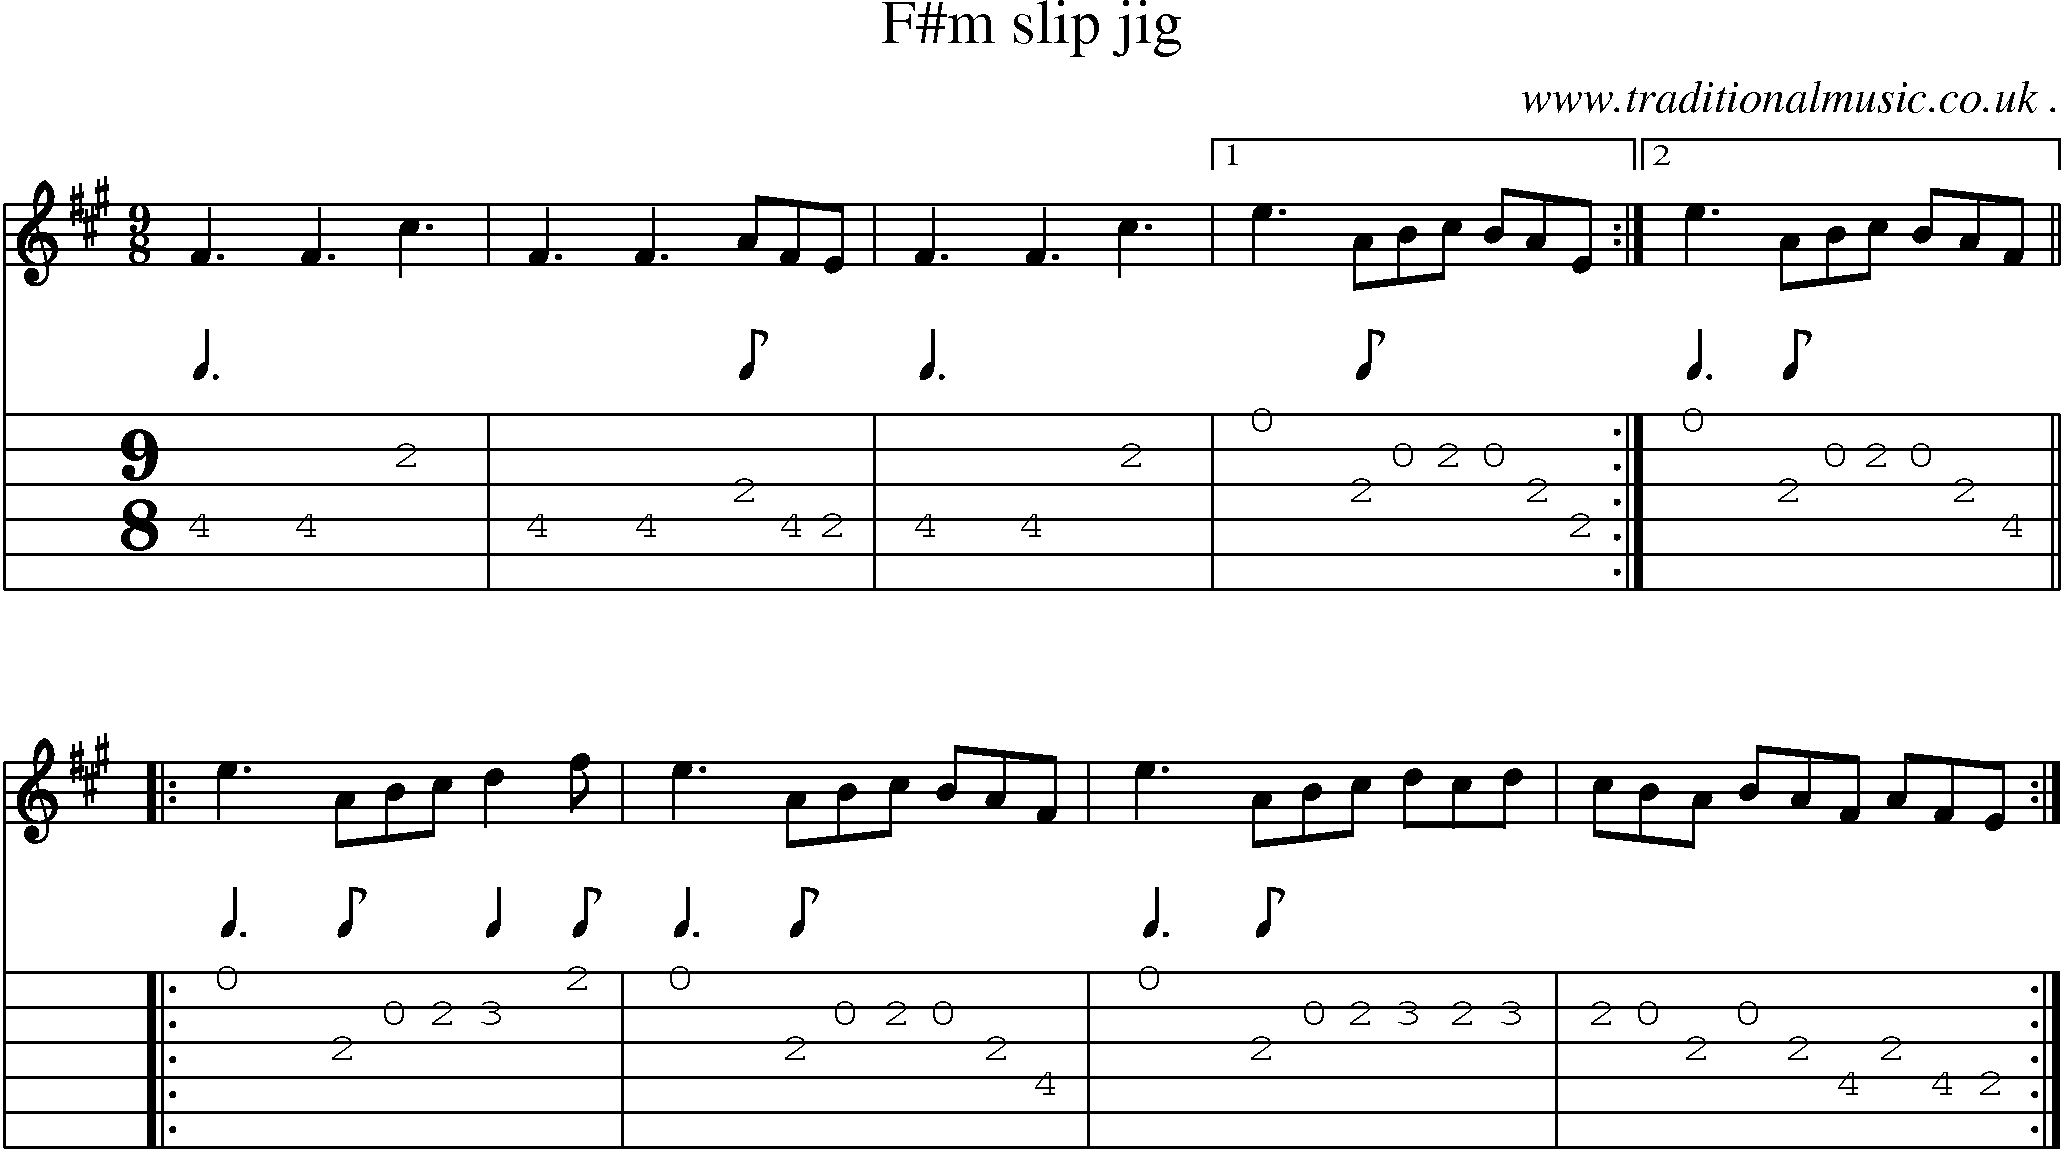 Sheet-Music and Guitar Tabs for Fm Slip Jig